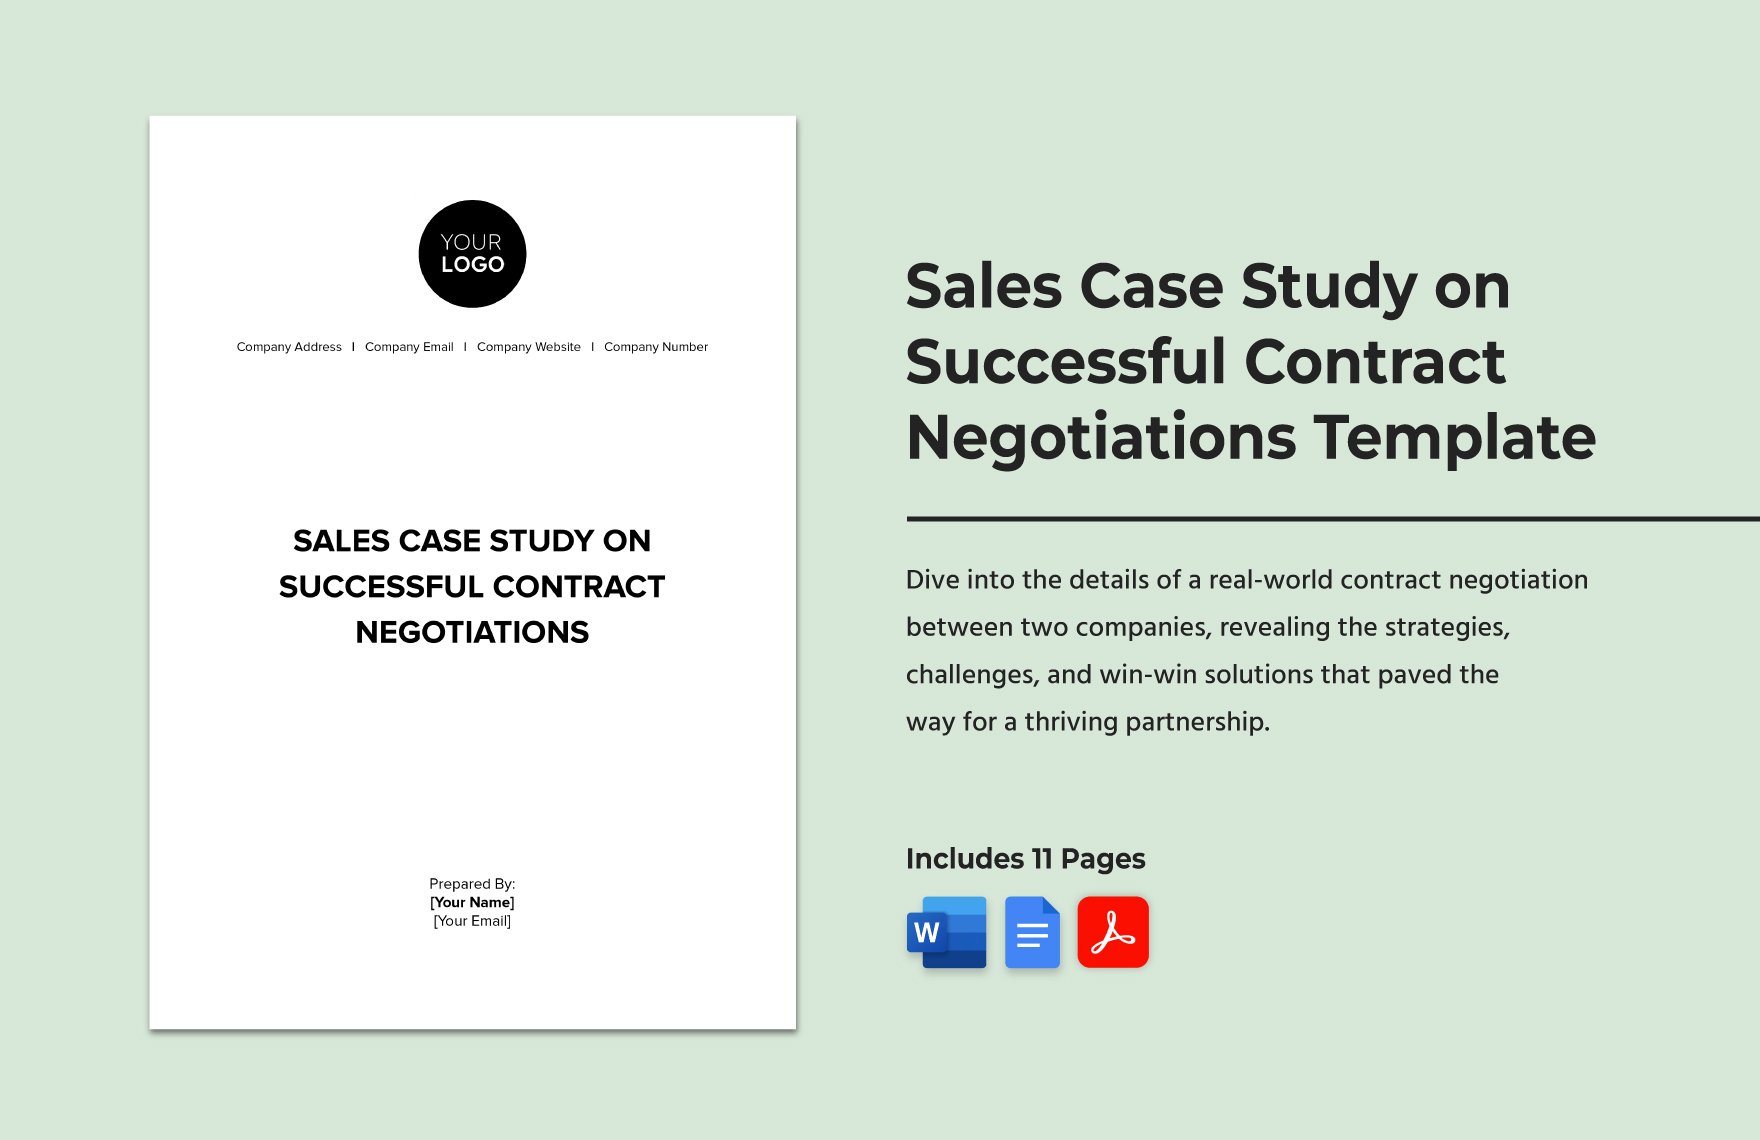 Sales Case Study on Successful Contract Negotiations Template